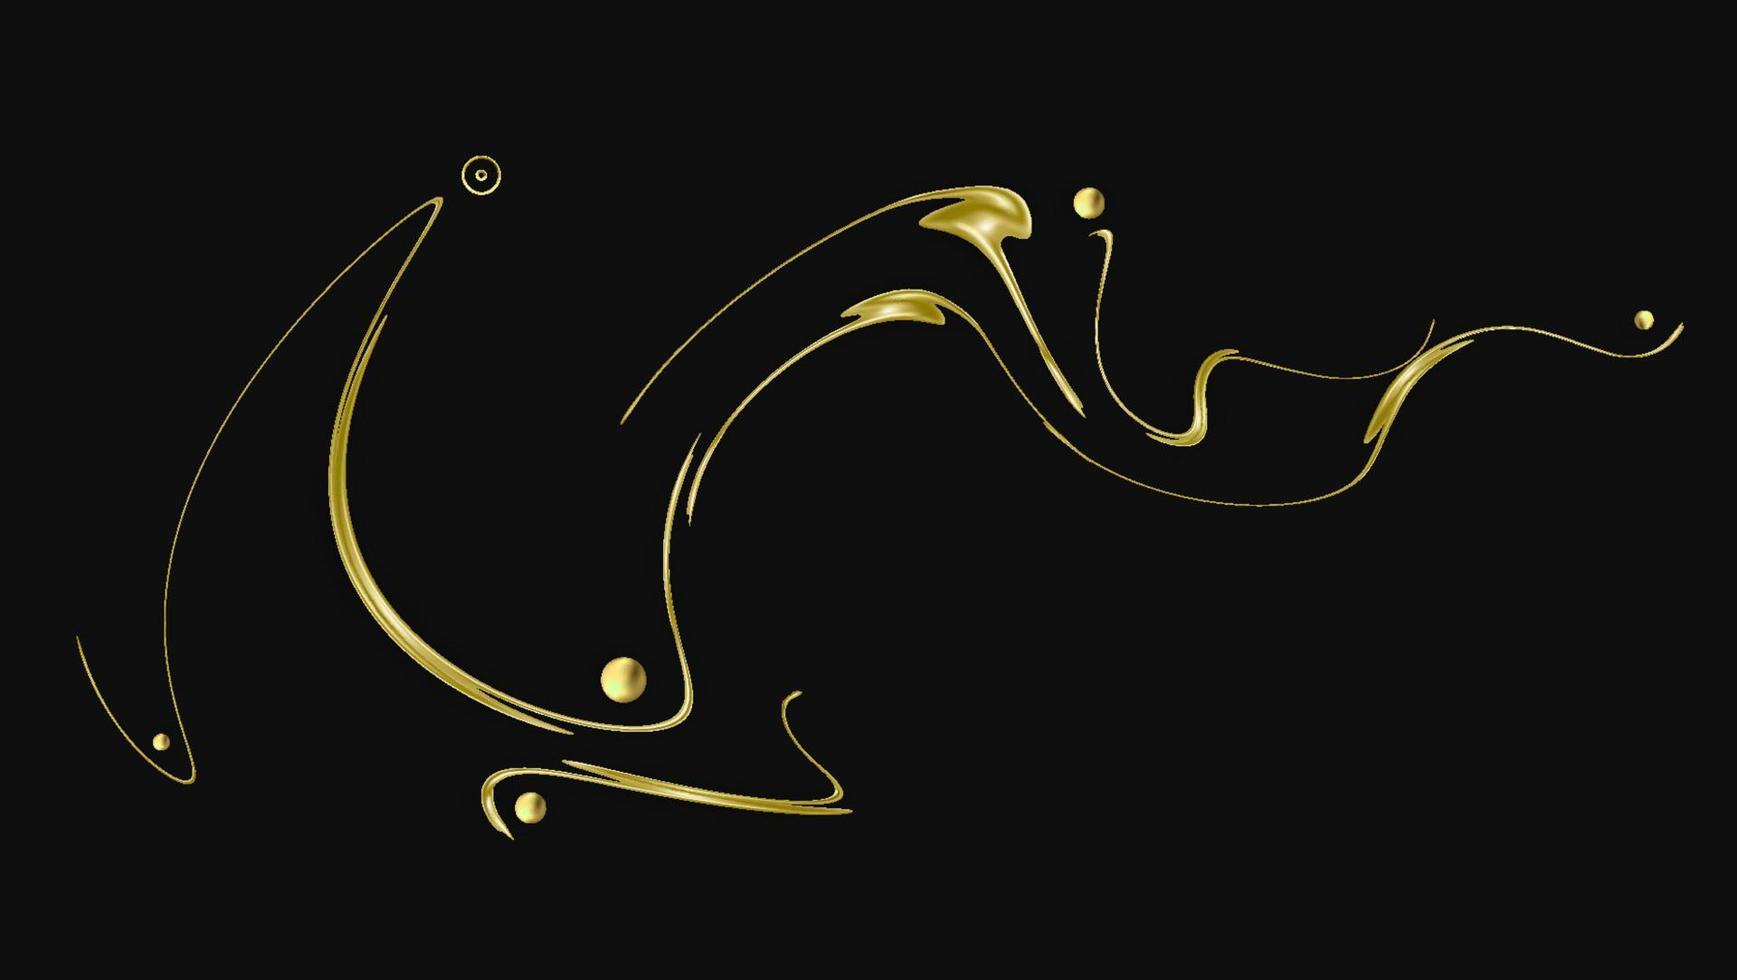 Modern background with abstract Gold elements and dynamic shapes vector